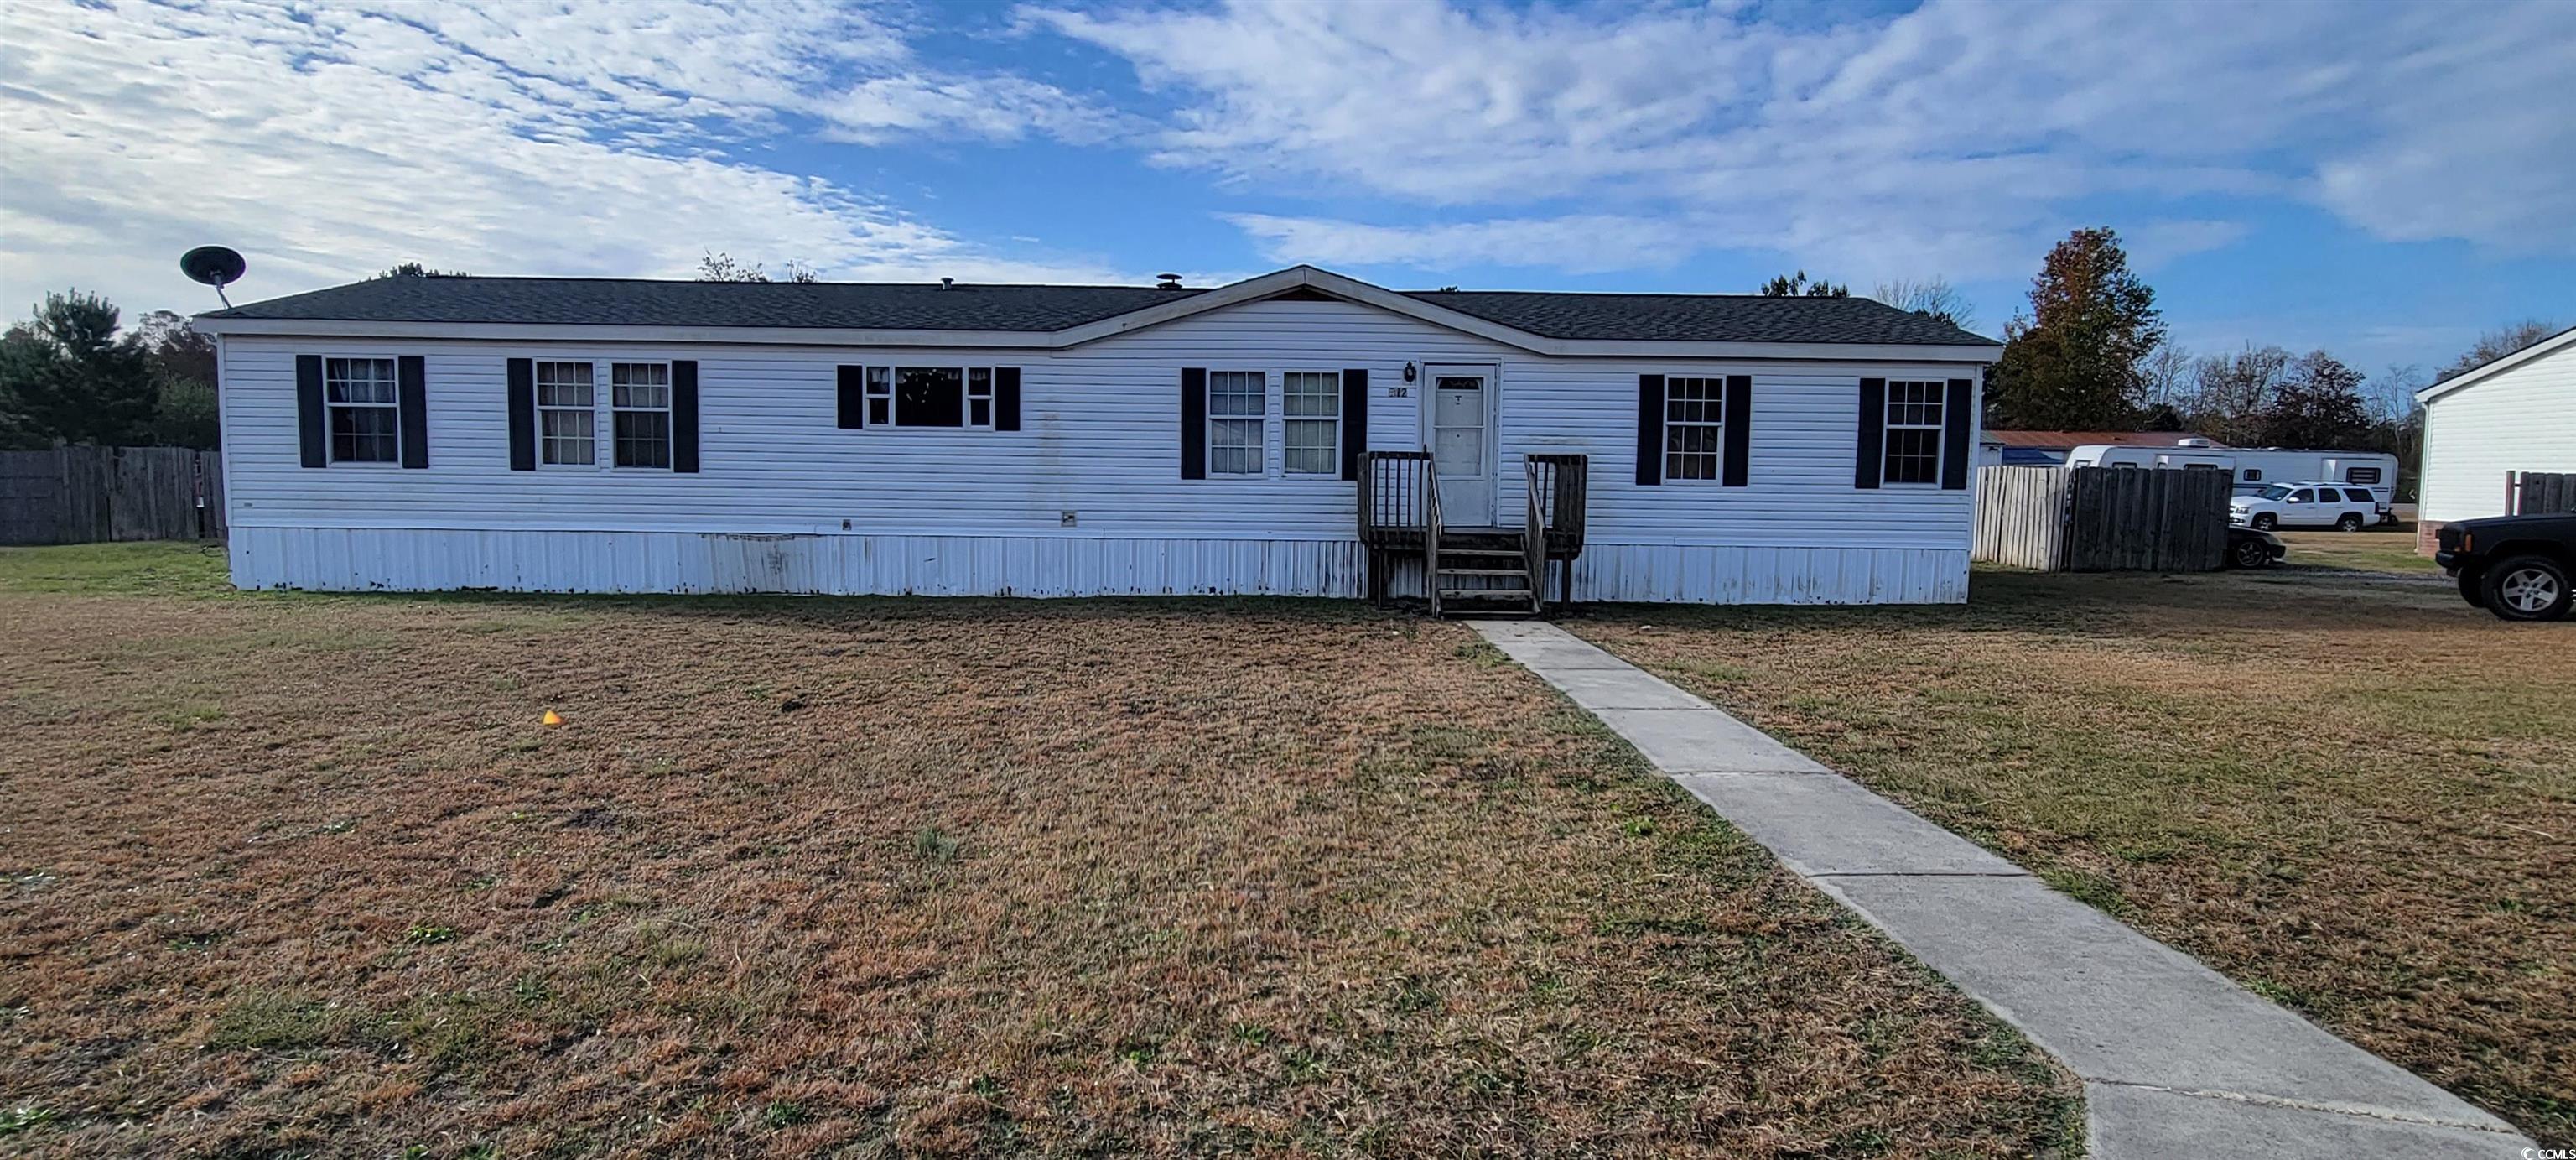 this 4 bedroom, 2 bath home is ready for your sweat equity! home sits on 0.5 acres in bryants landing off of highway 905 in conway. plenty of room inside with split bedroom floor plan, fireplace in living room, large kitchen/dining area. easy access to downtown conway and area beaches.